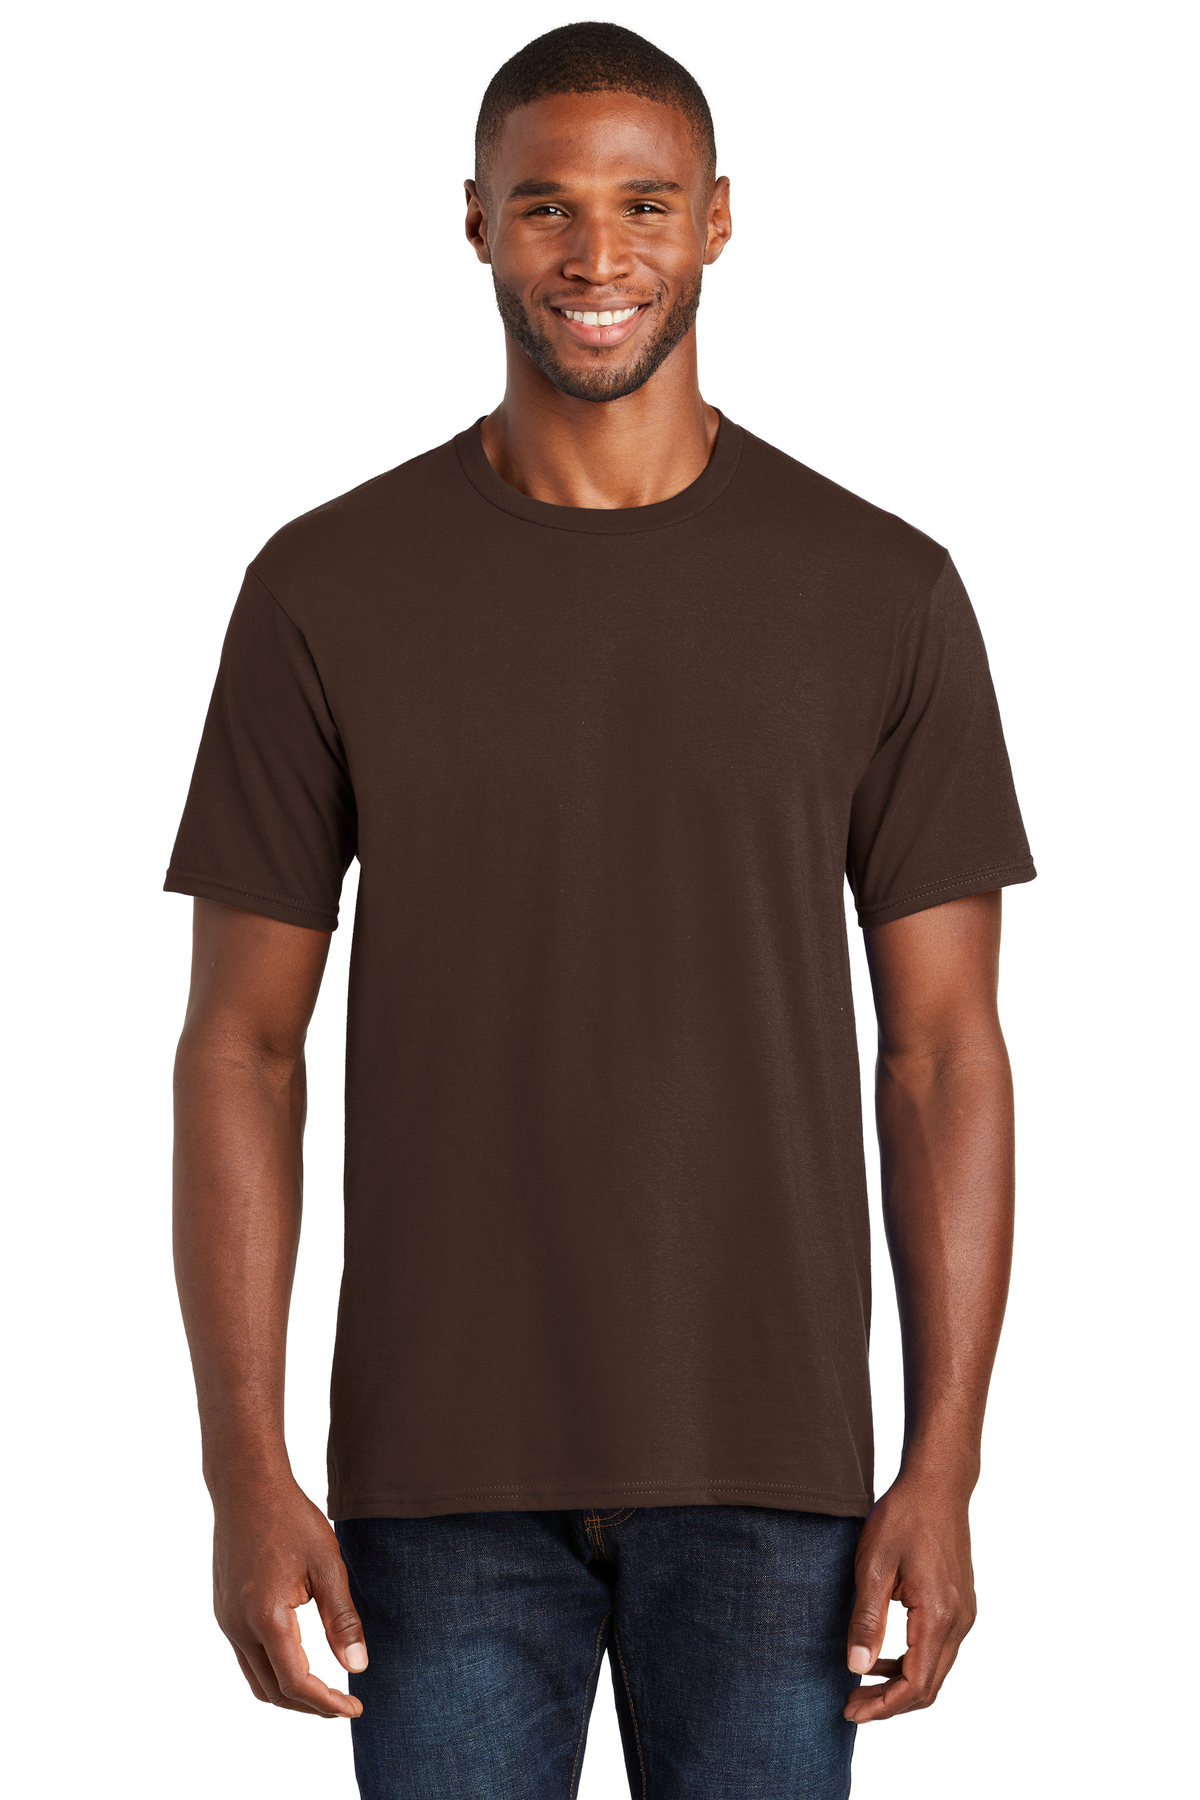 Port & Company Embroidered Men's Fan Favorite Tee | T-Shirts - Queensboro